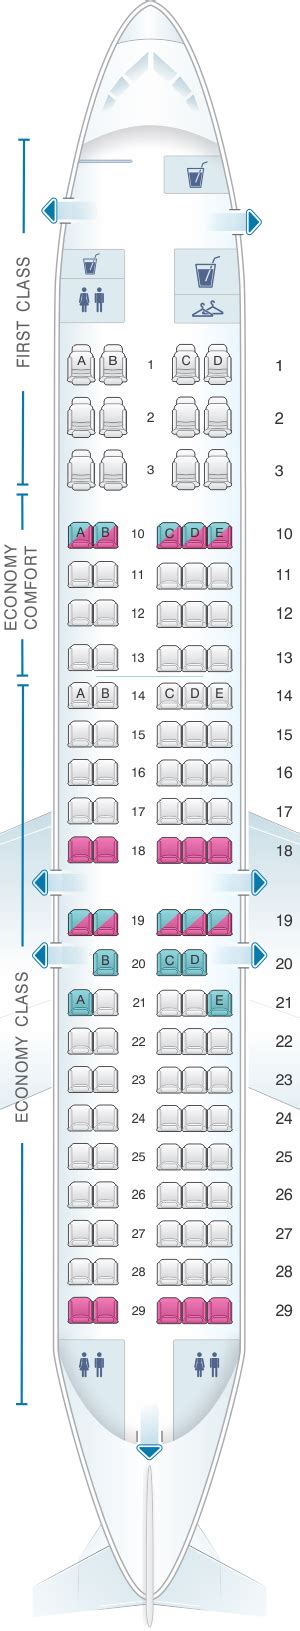 Delta Airbus A330 Seat Maps. Delta operates two models of Airbus, the A330-200 and A330-300. It has 11 A330-200s and 31 A330-300s in its fleet for 2022. The airline has also ordered 11 A330-900 aircraft. A330-200 can be used for flights of practical any distance.. 